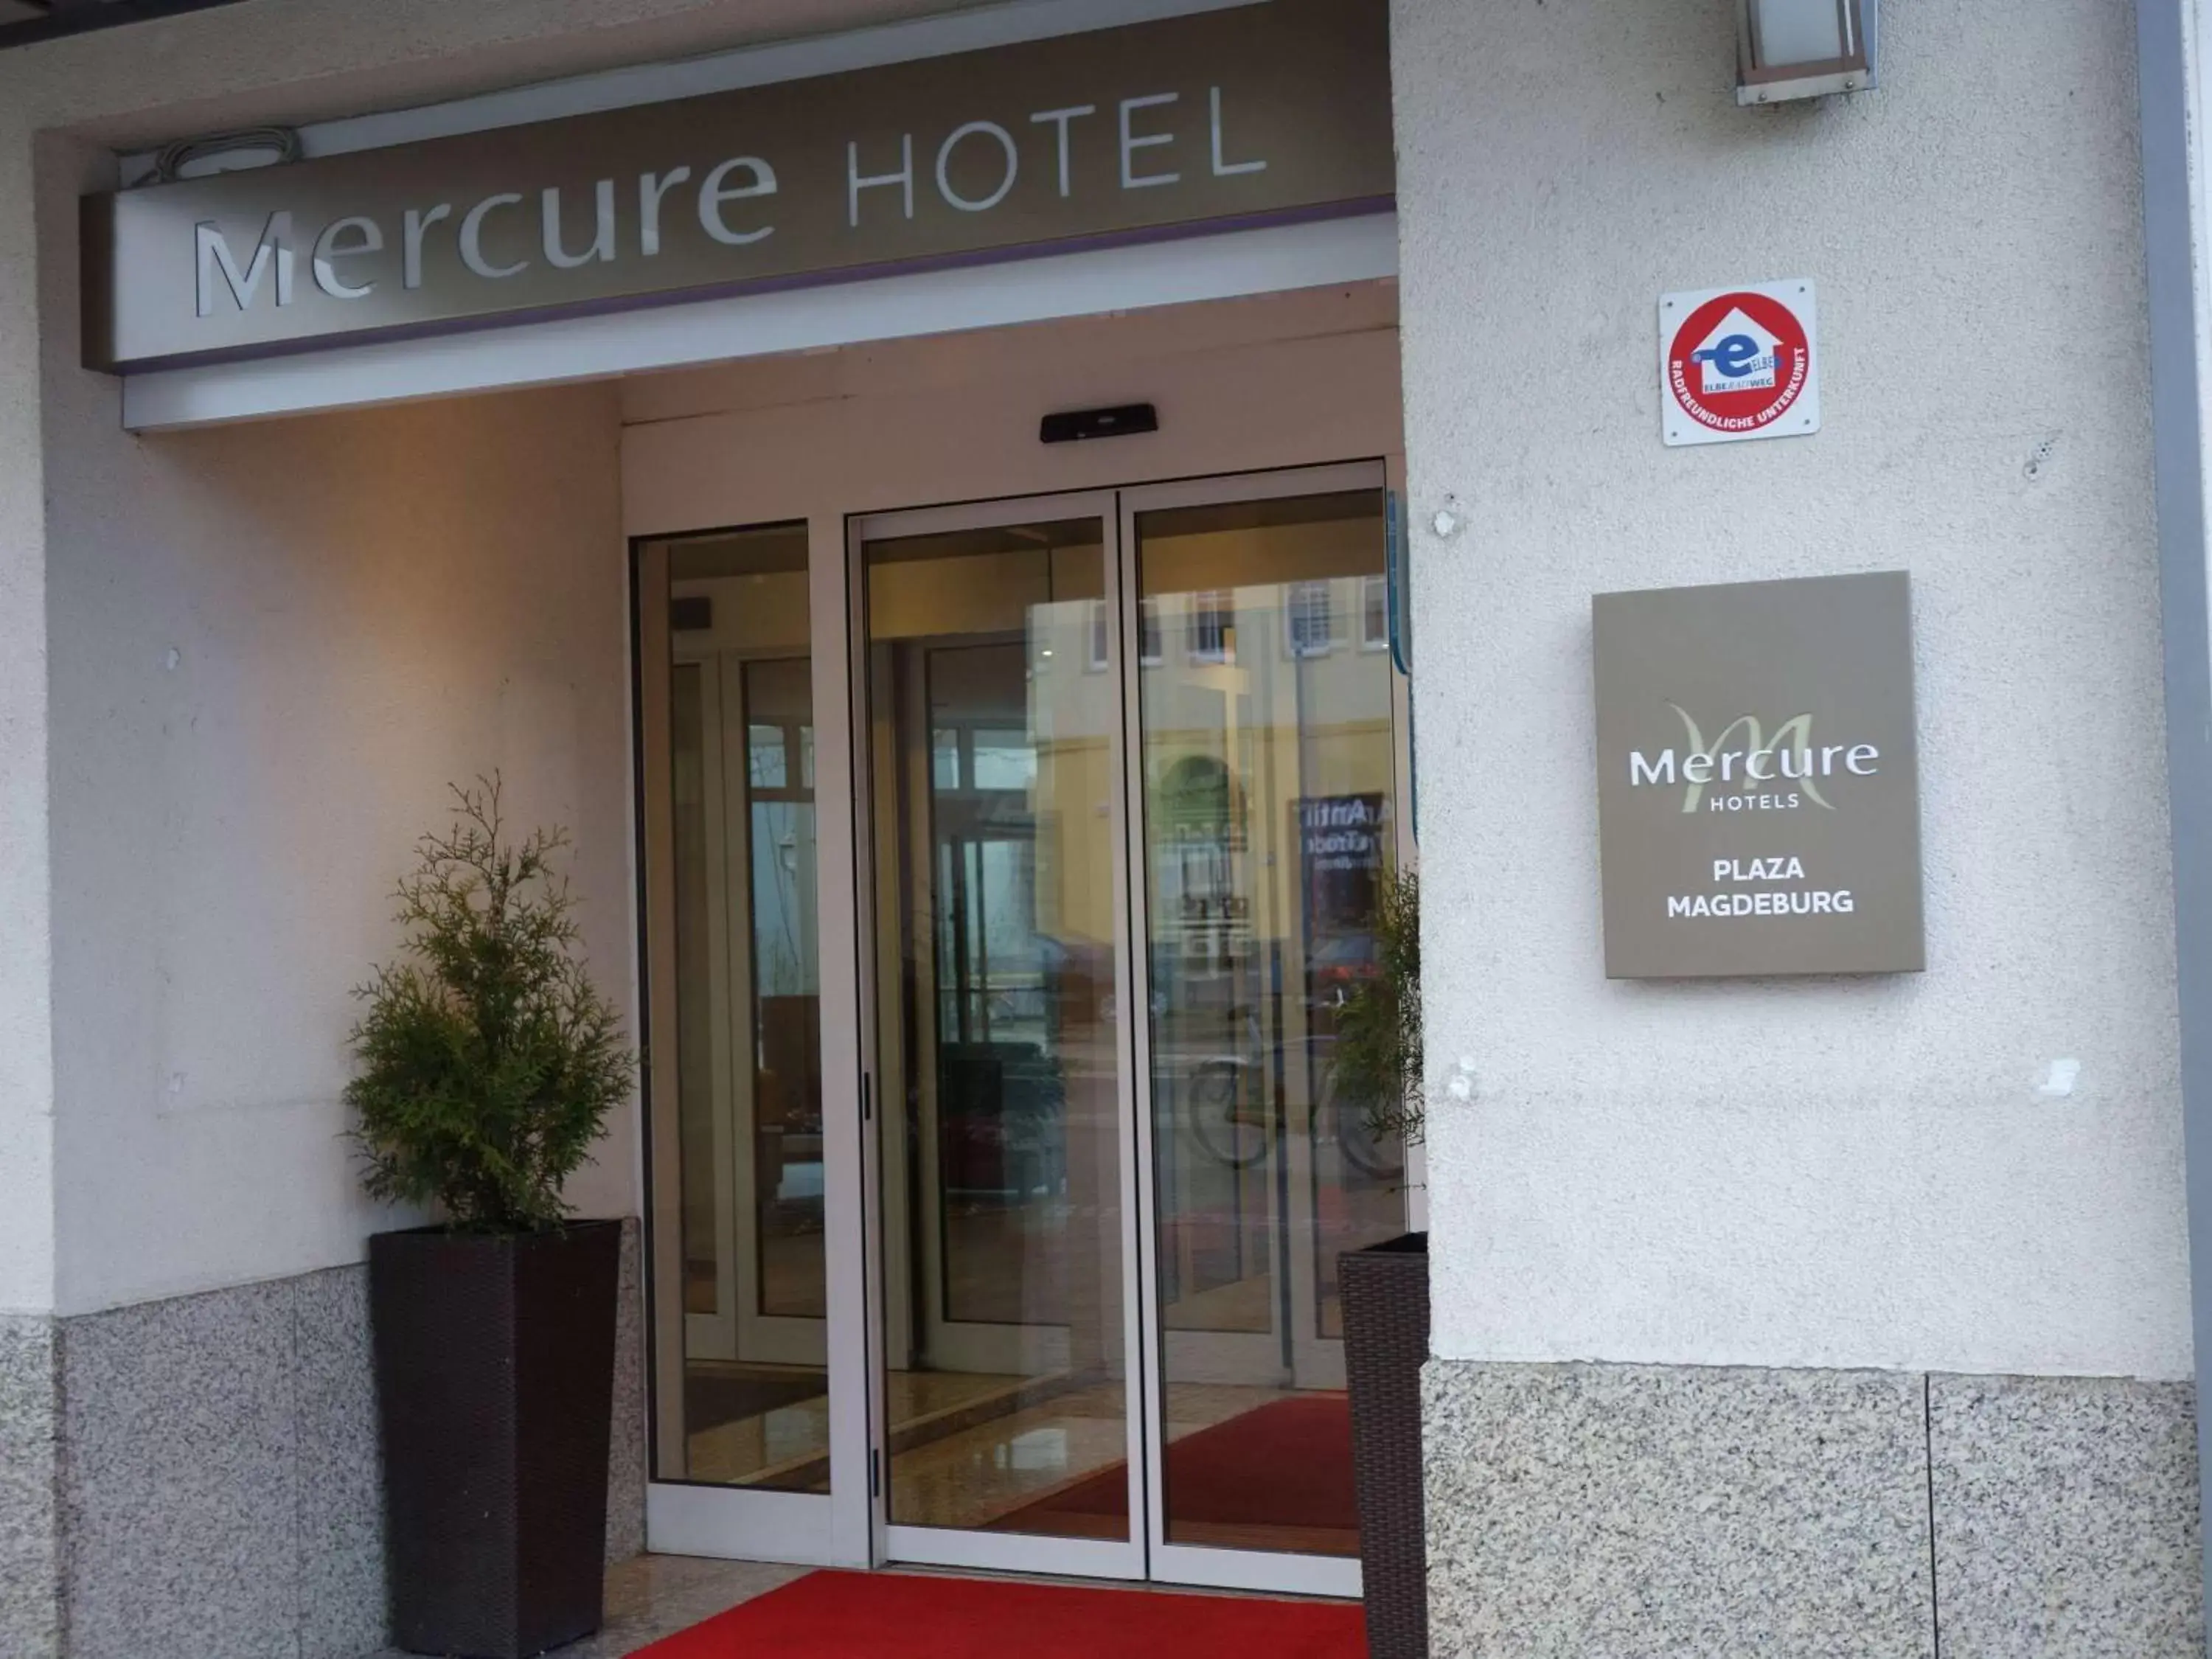 Property building, Property Logo/Sign in Mercure Hotel Plaza Magdeburg